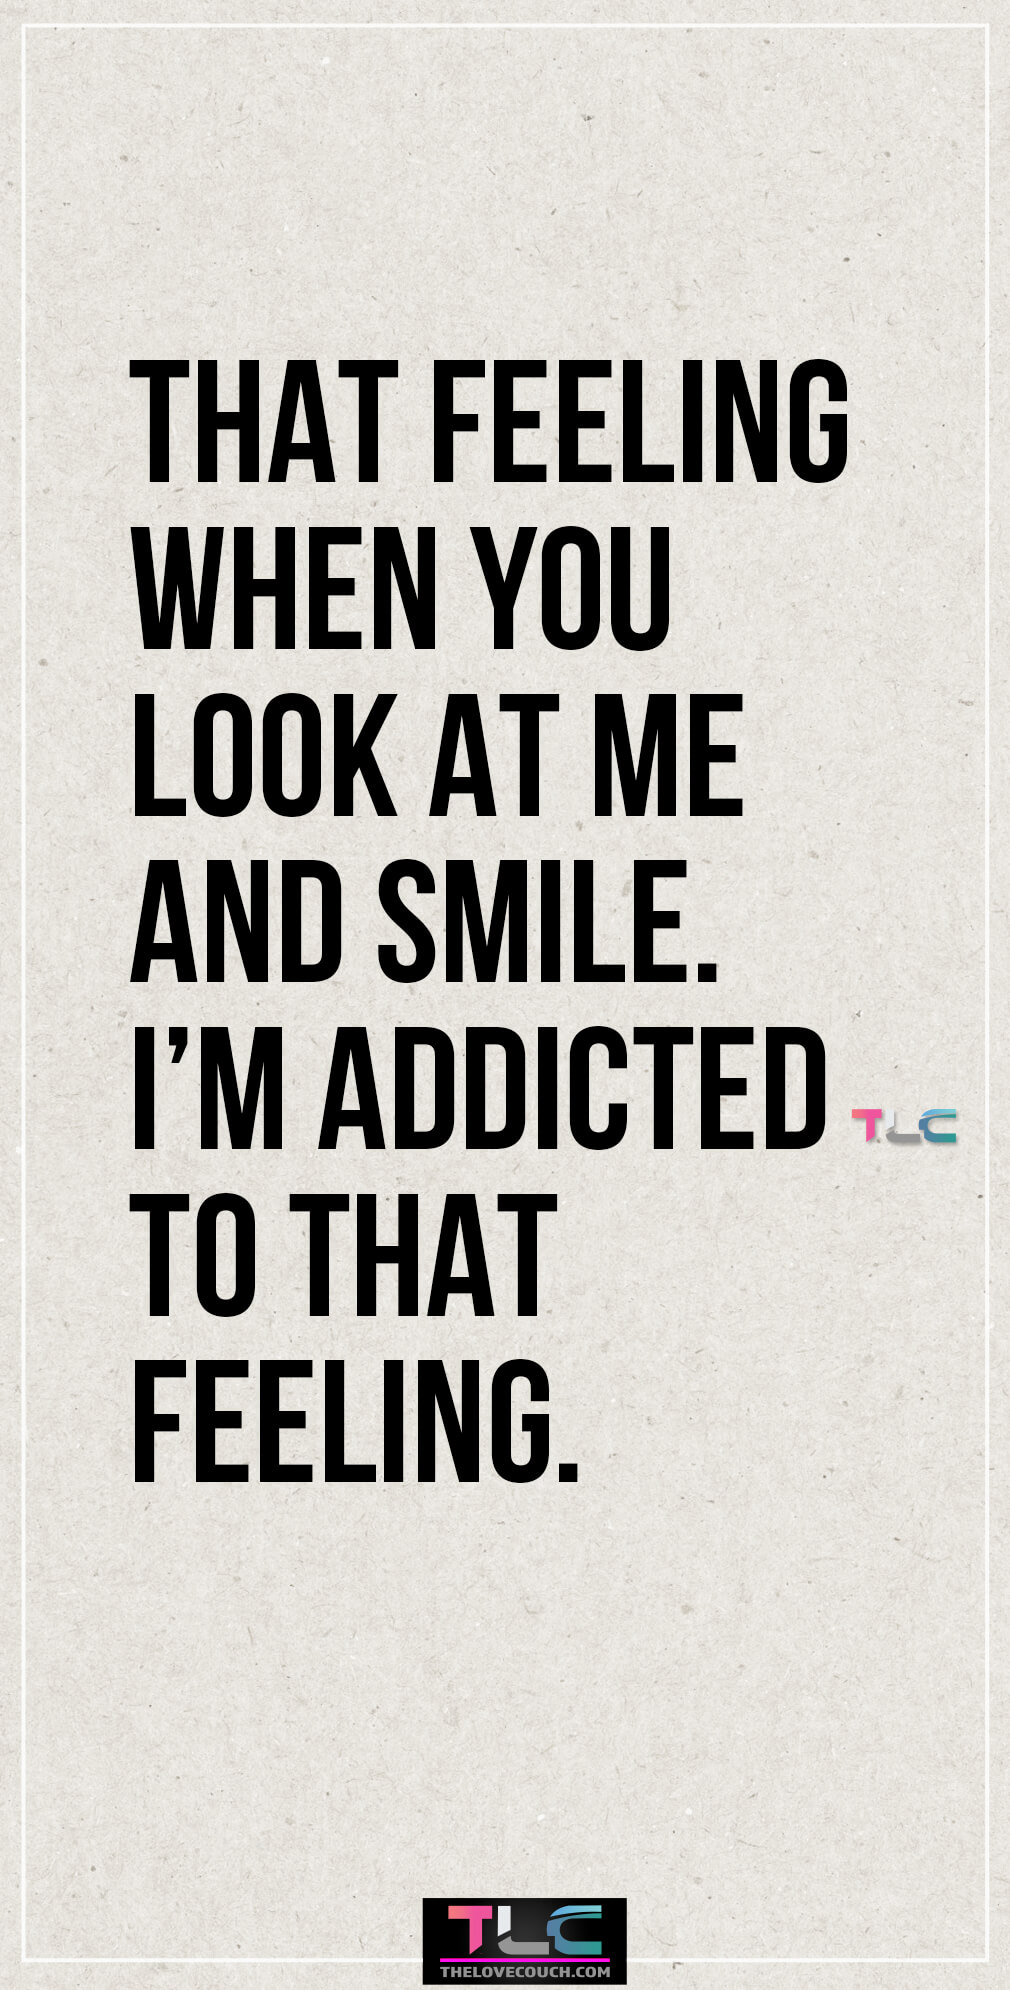 That feeling when you look at me and smile. I’m addicted to that feeling.